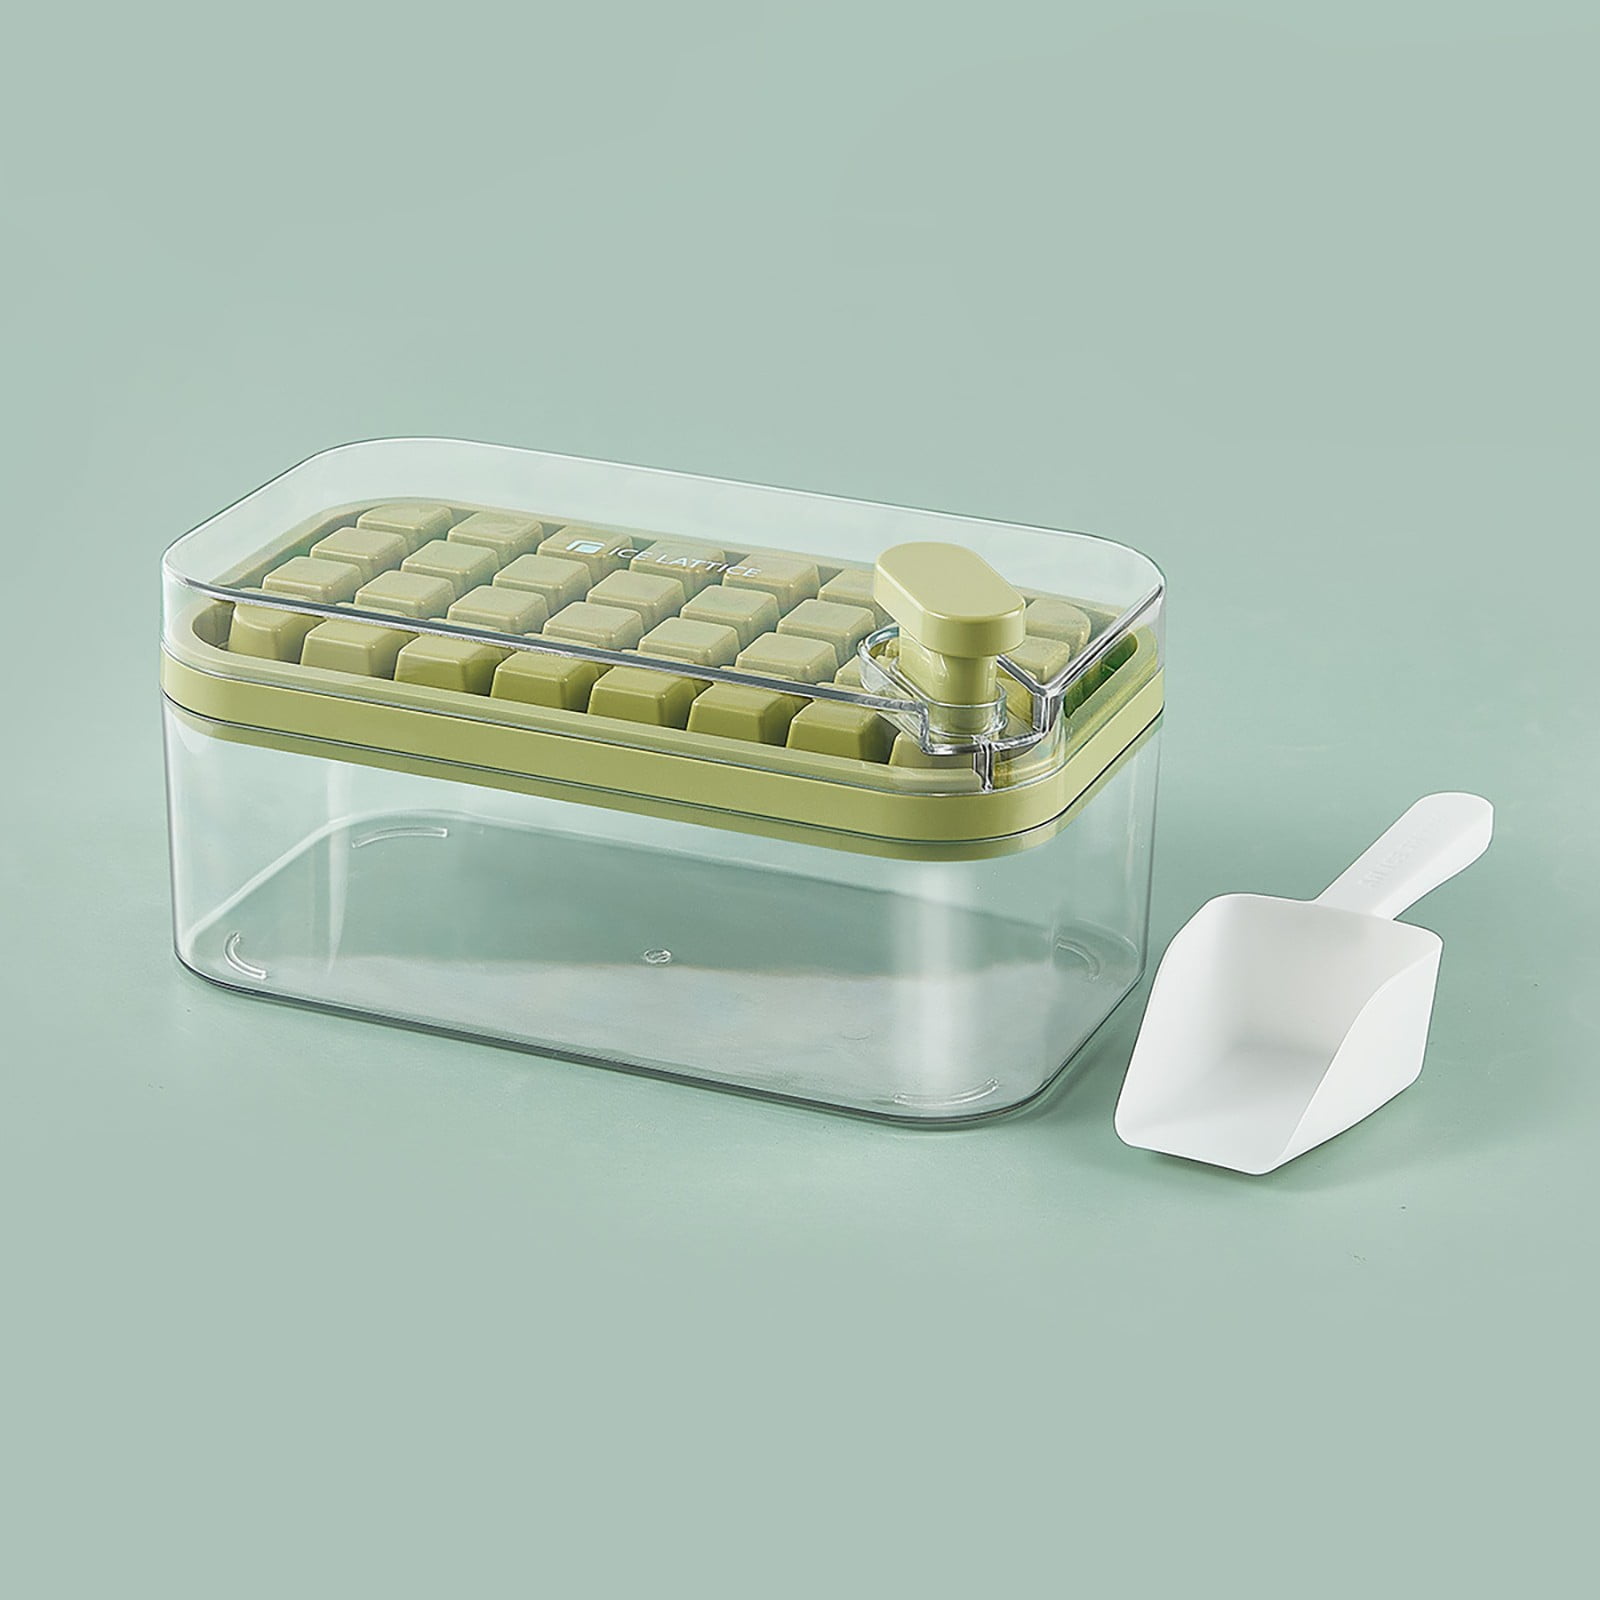 SDJMa One Touch Release Ice Cube Tray with Lid for Freezer, 64